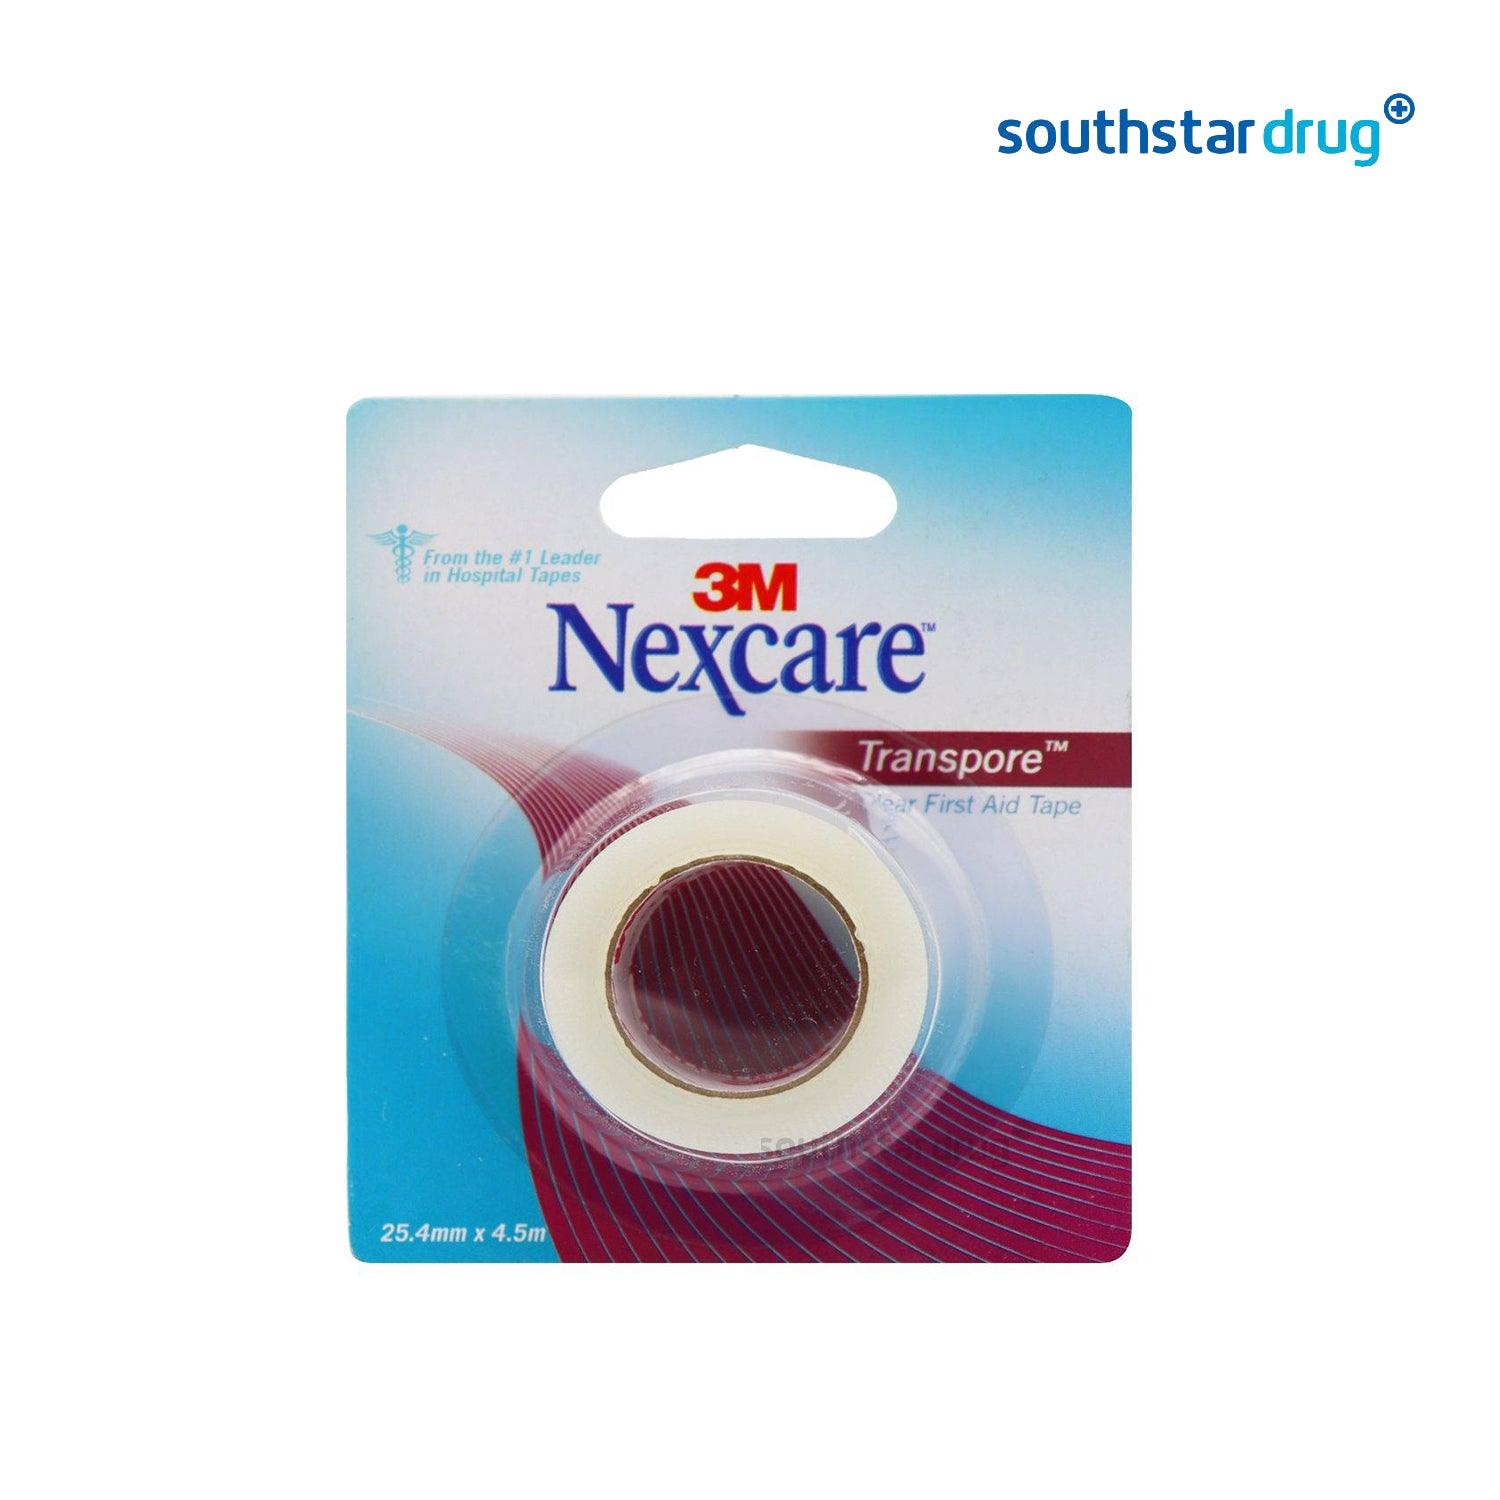 Nexcare Transpore Clear First Aid Tape